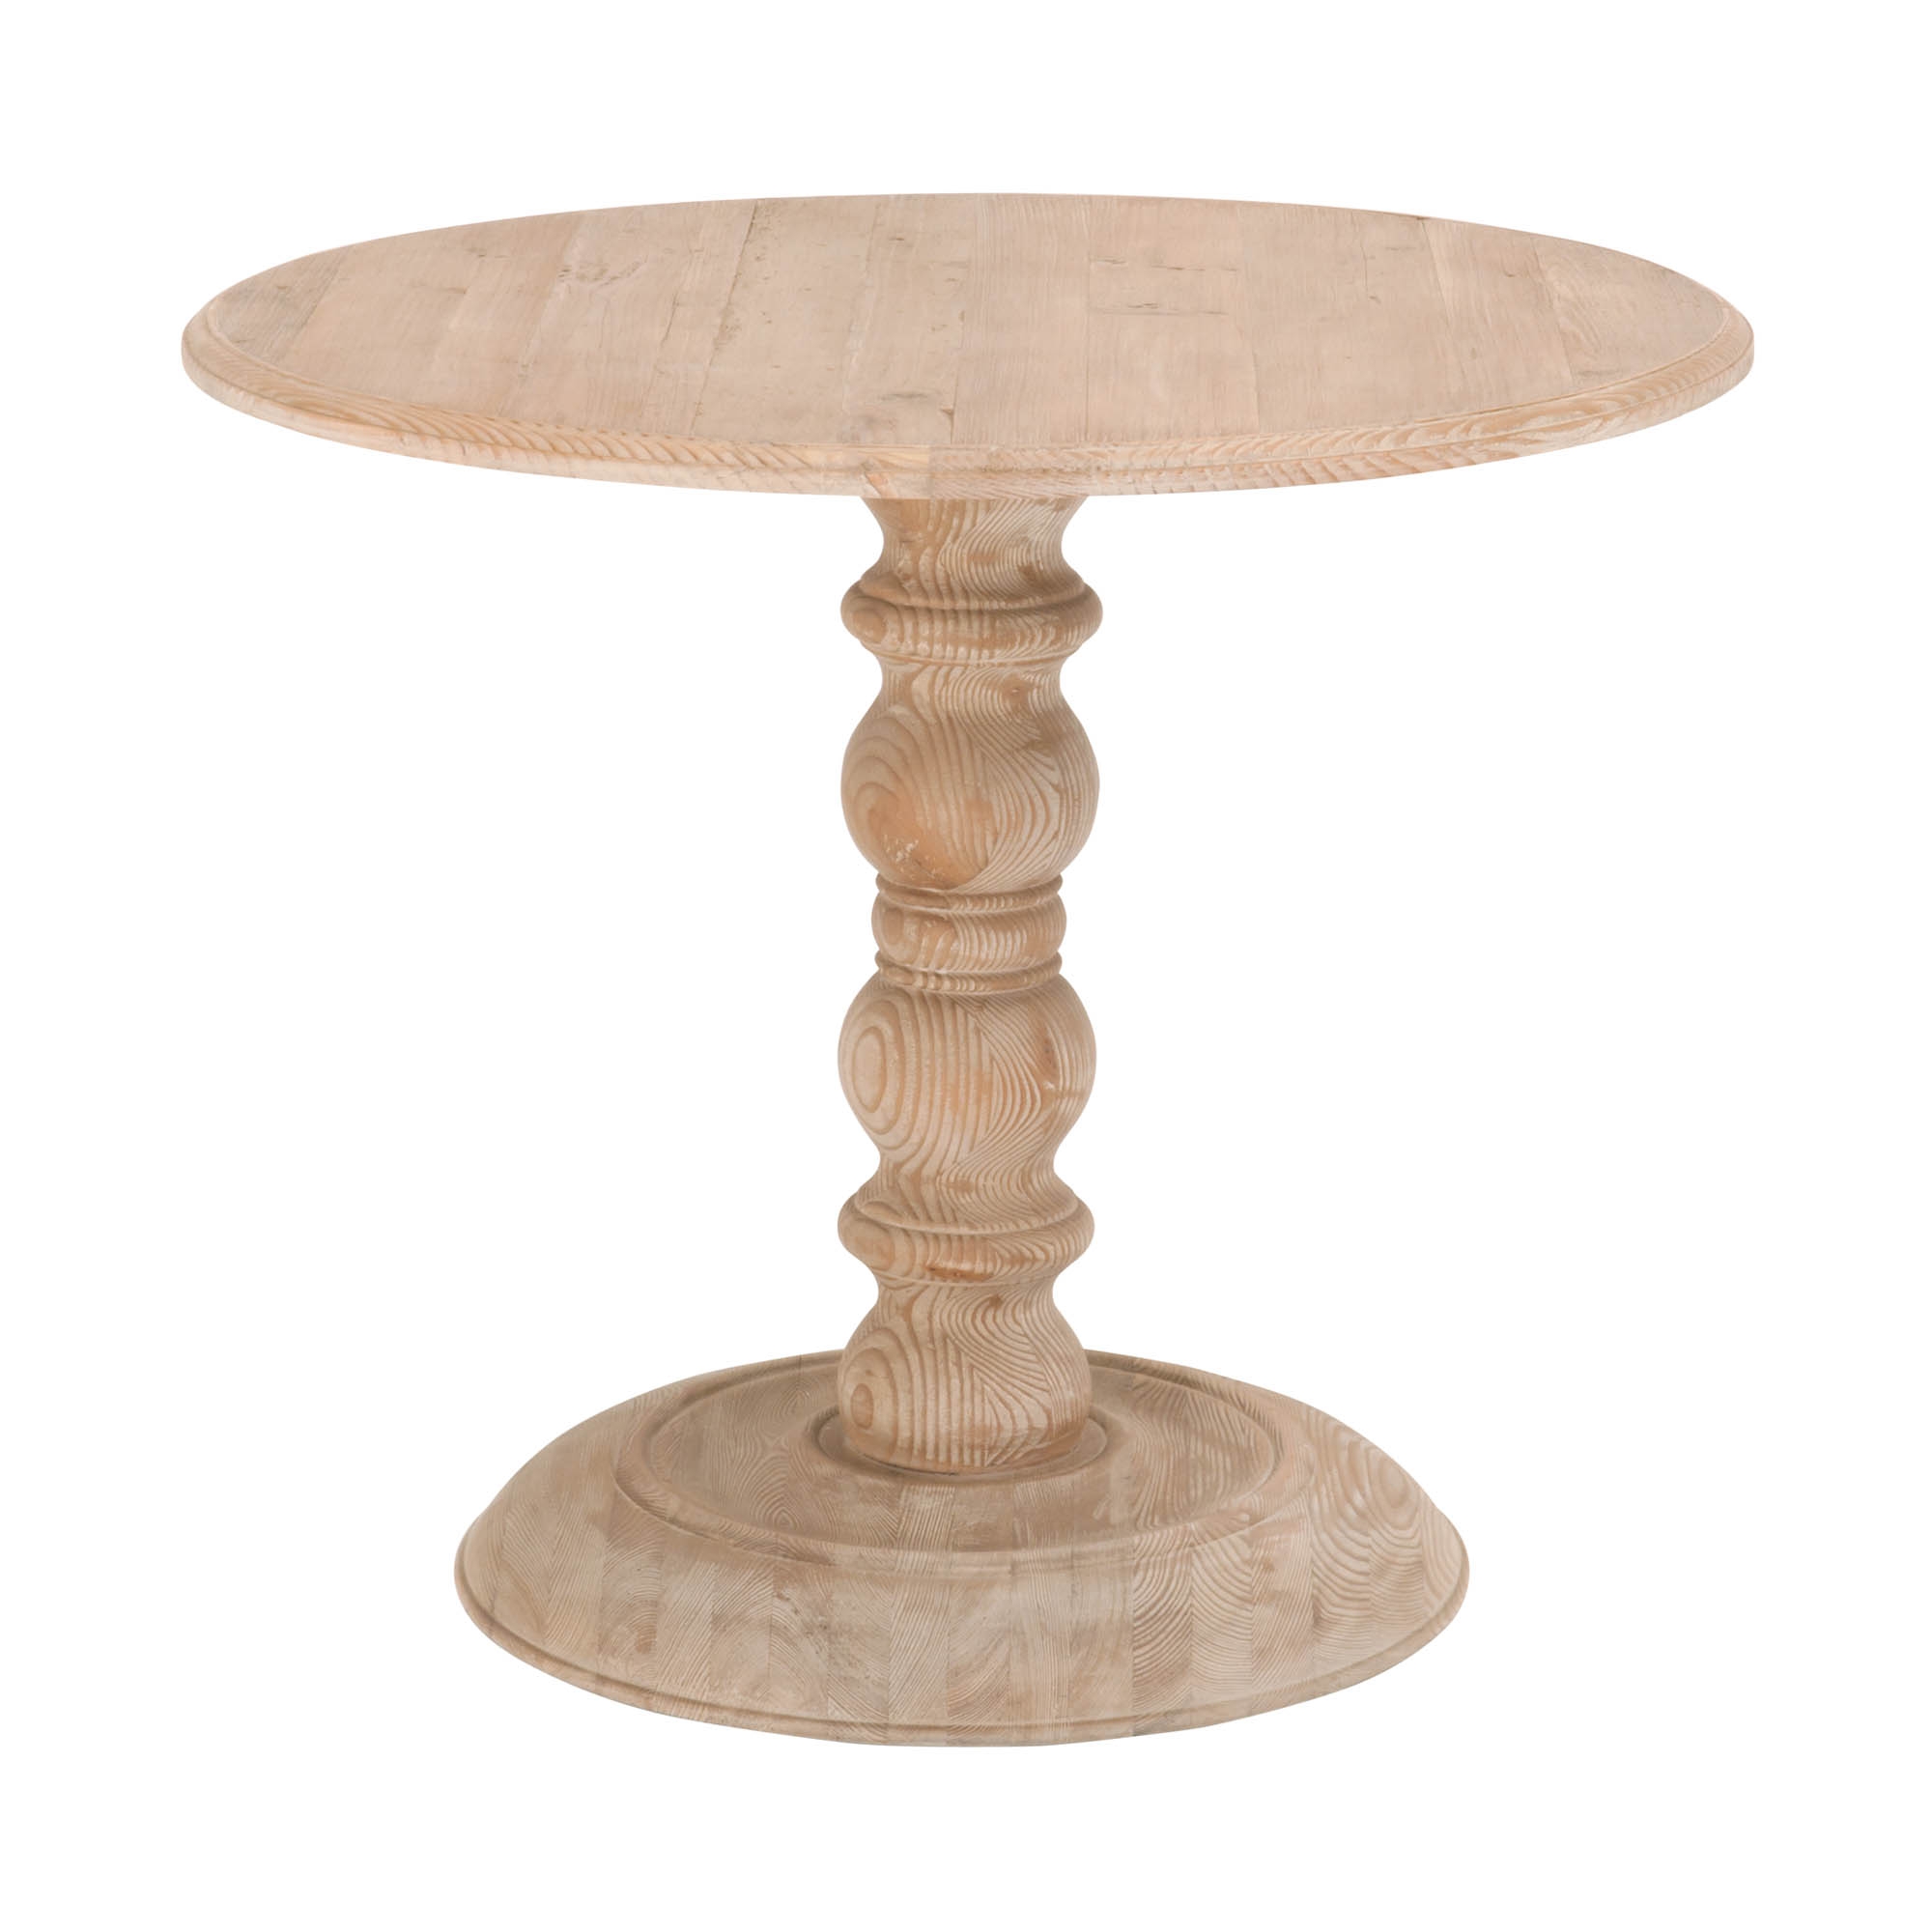 Elowen Round Dining Table, 36" - Image 1